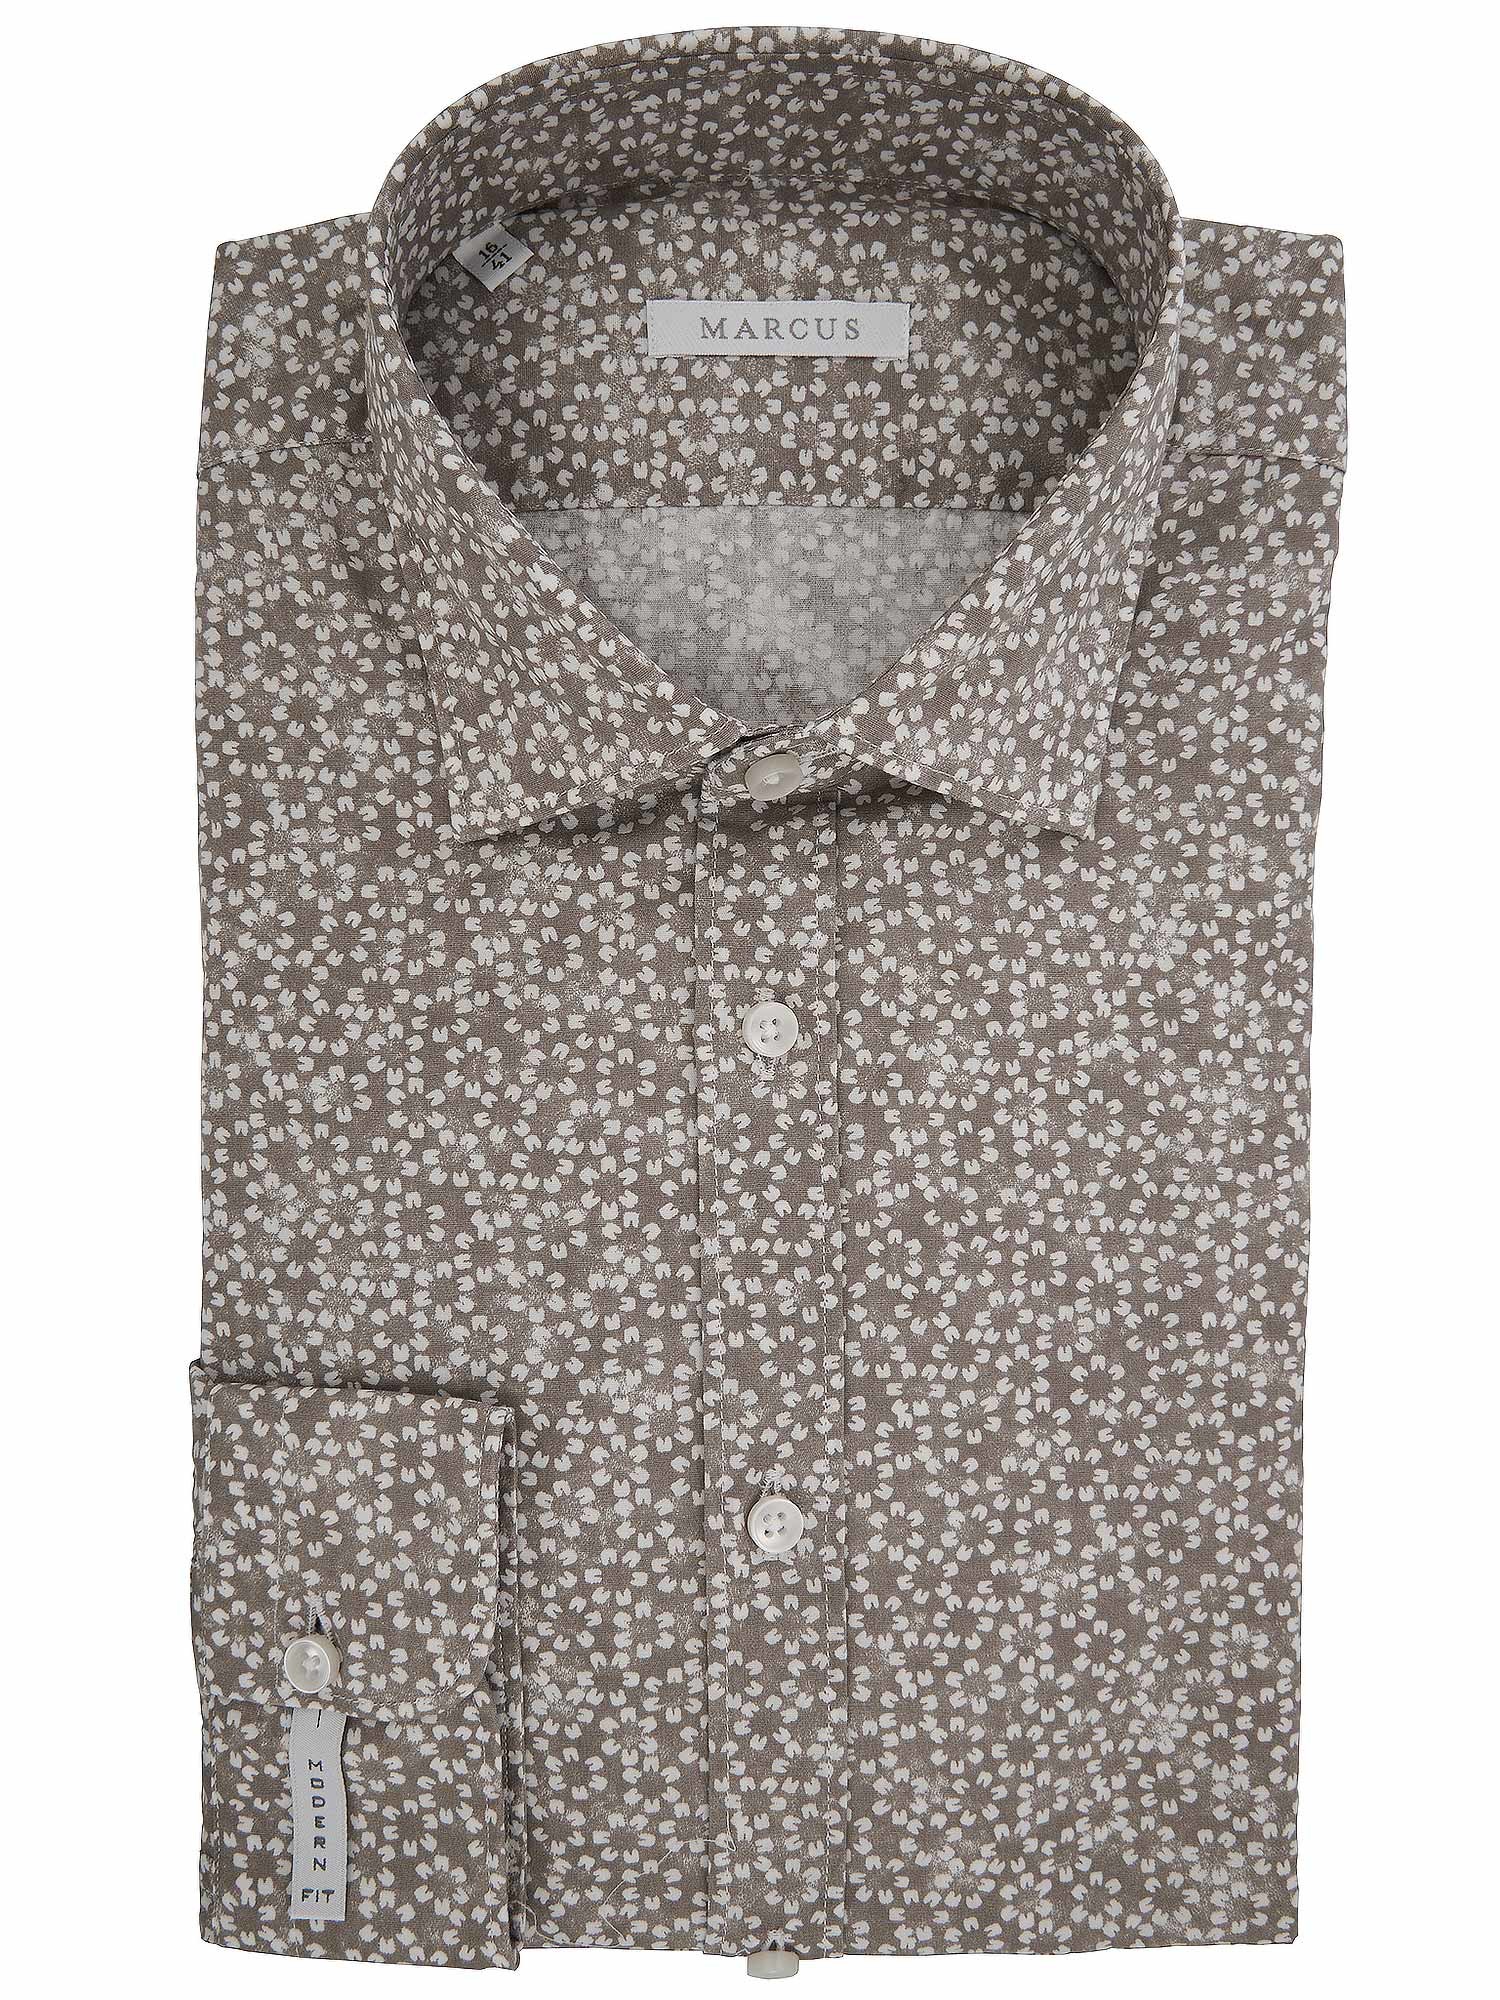 Marcus Men's Shirt with beige and white floral pattern and cutaway collar